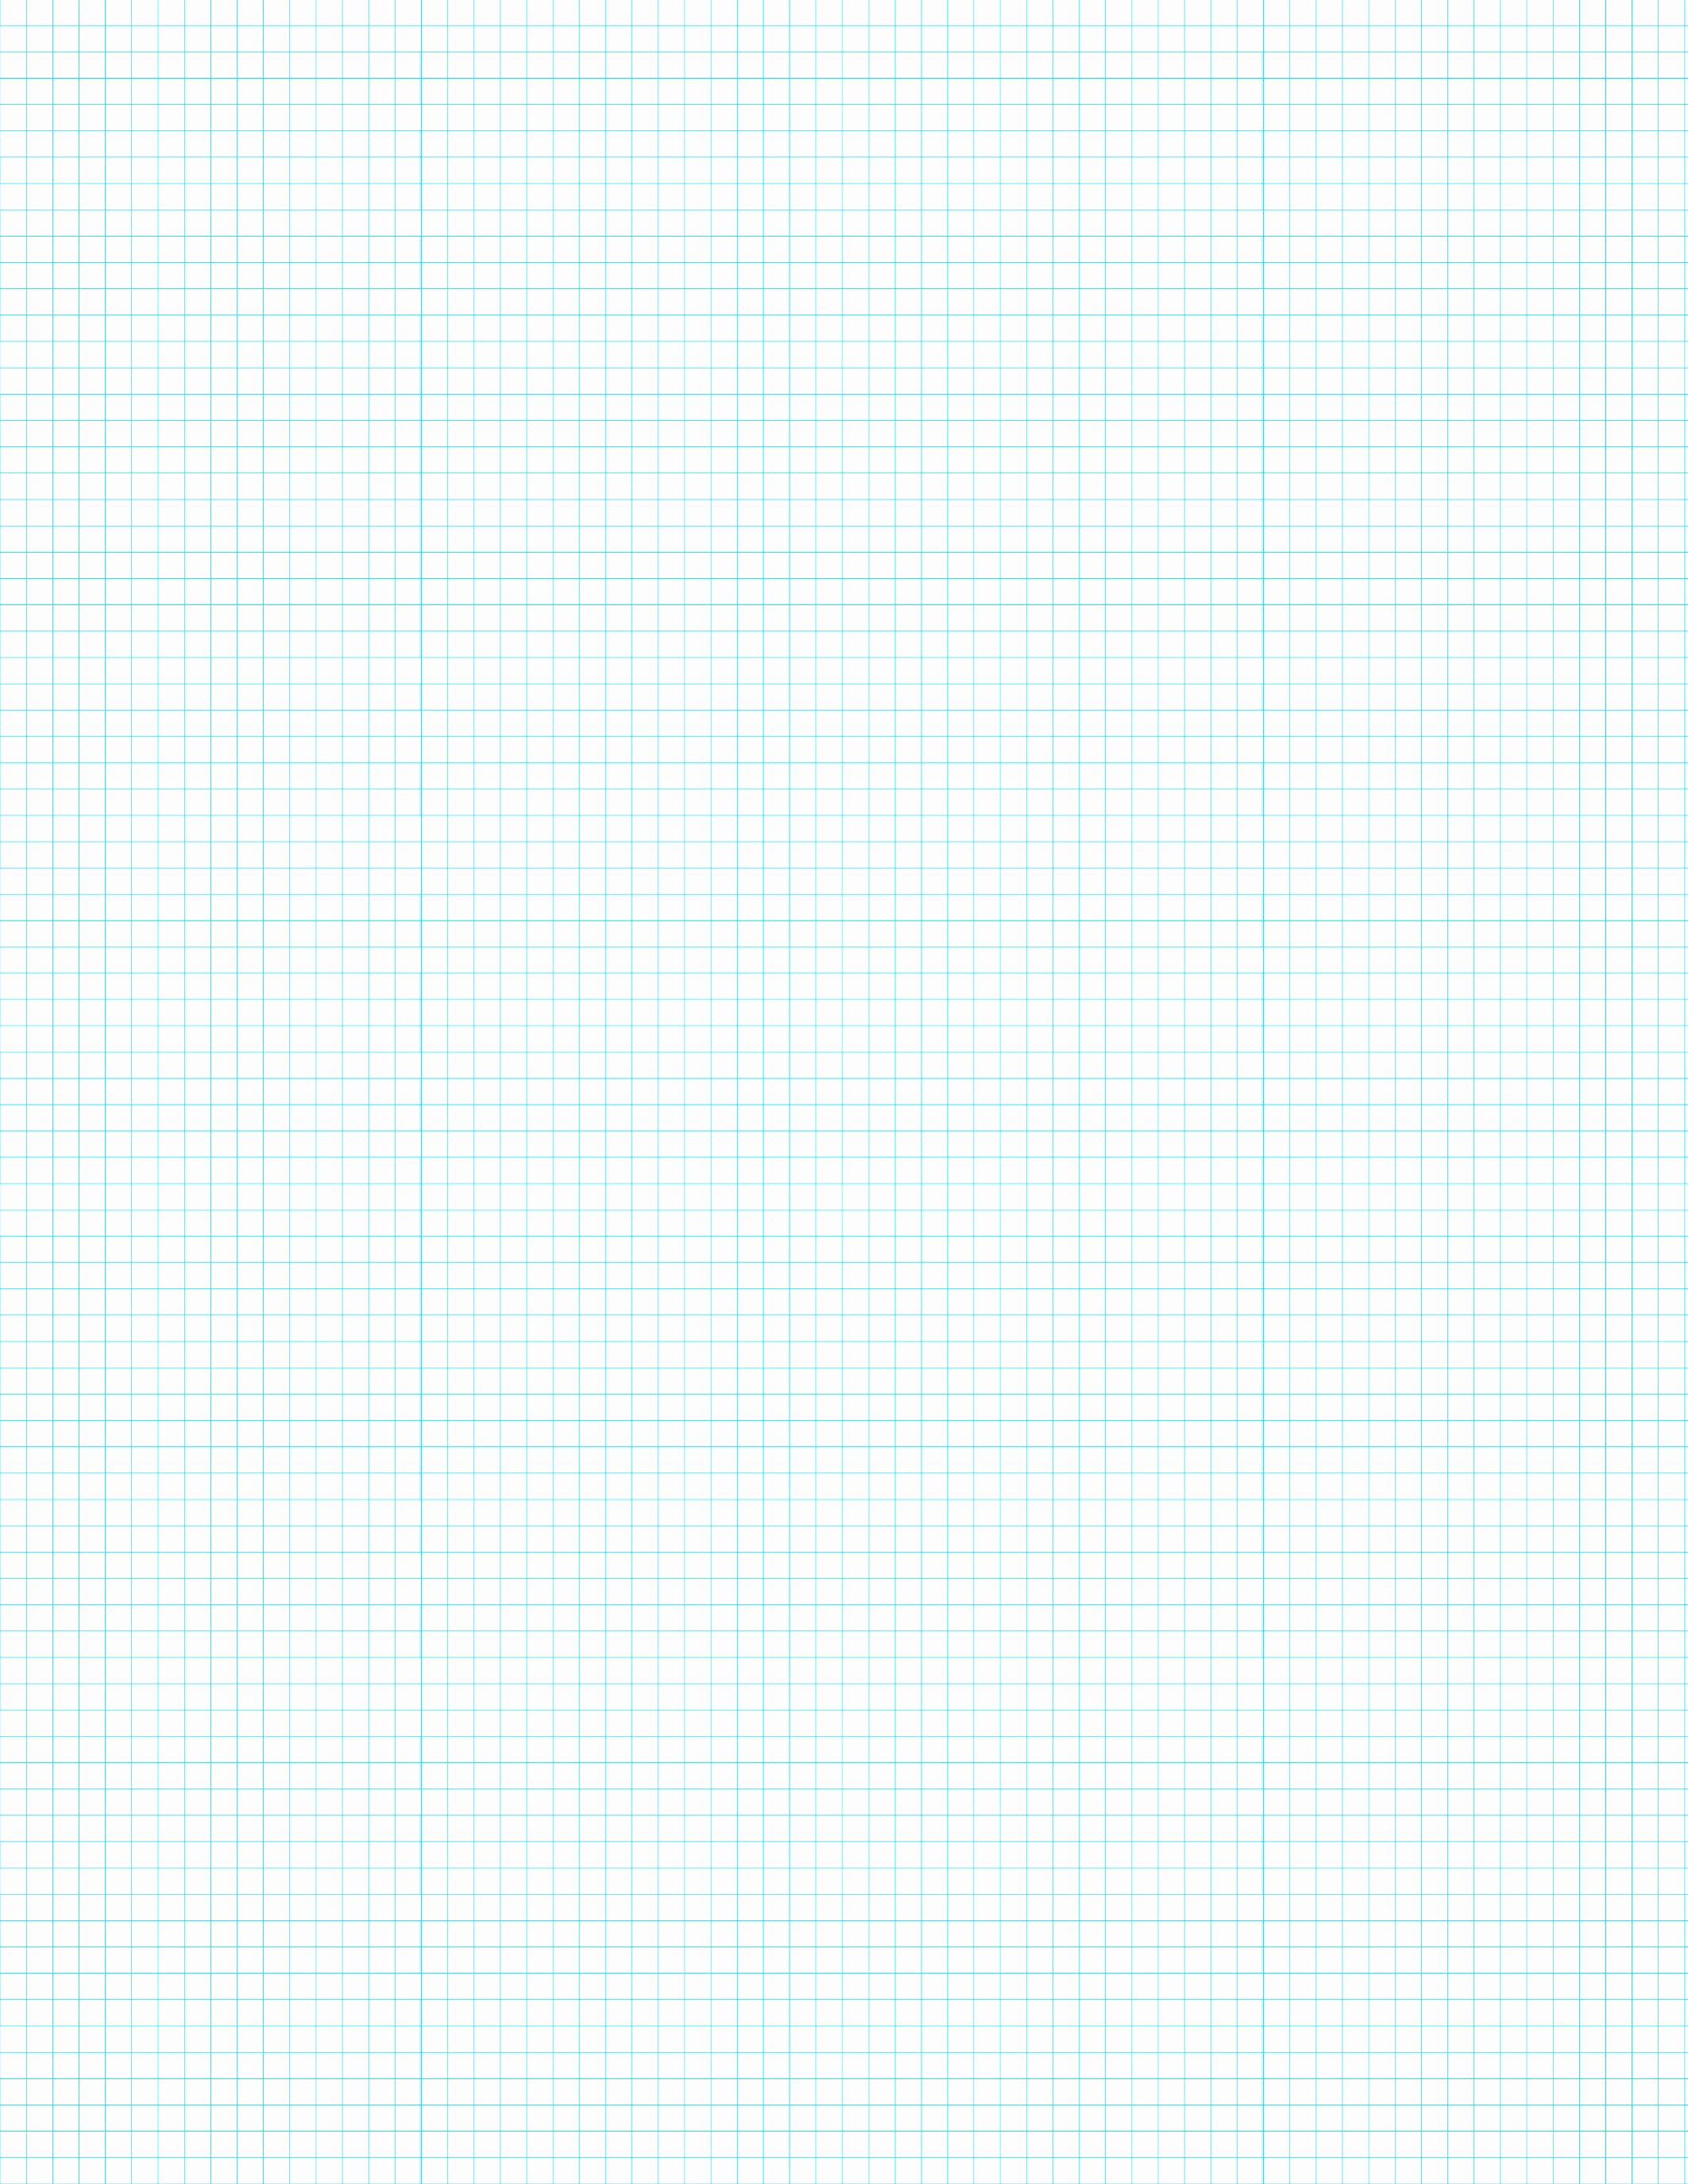 Graph Paper Printable Free Best Of Free Printable Graph Paper Paper Trail Design